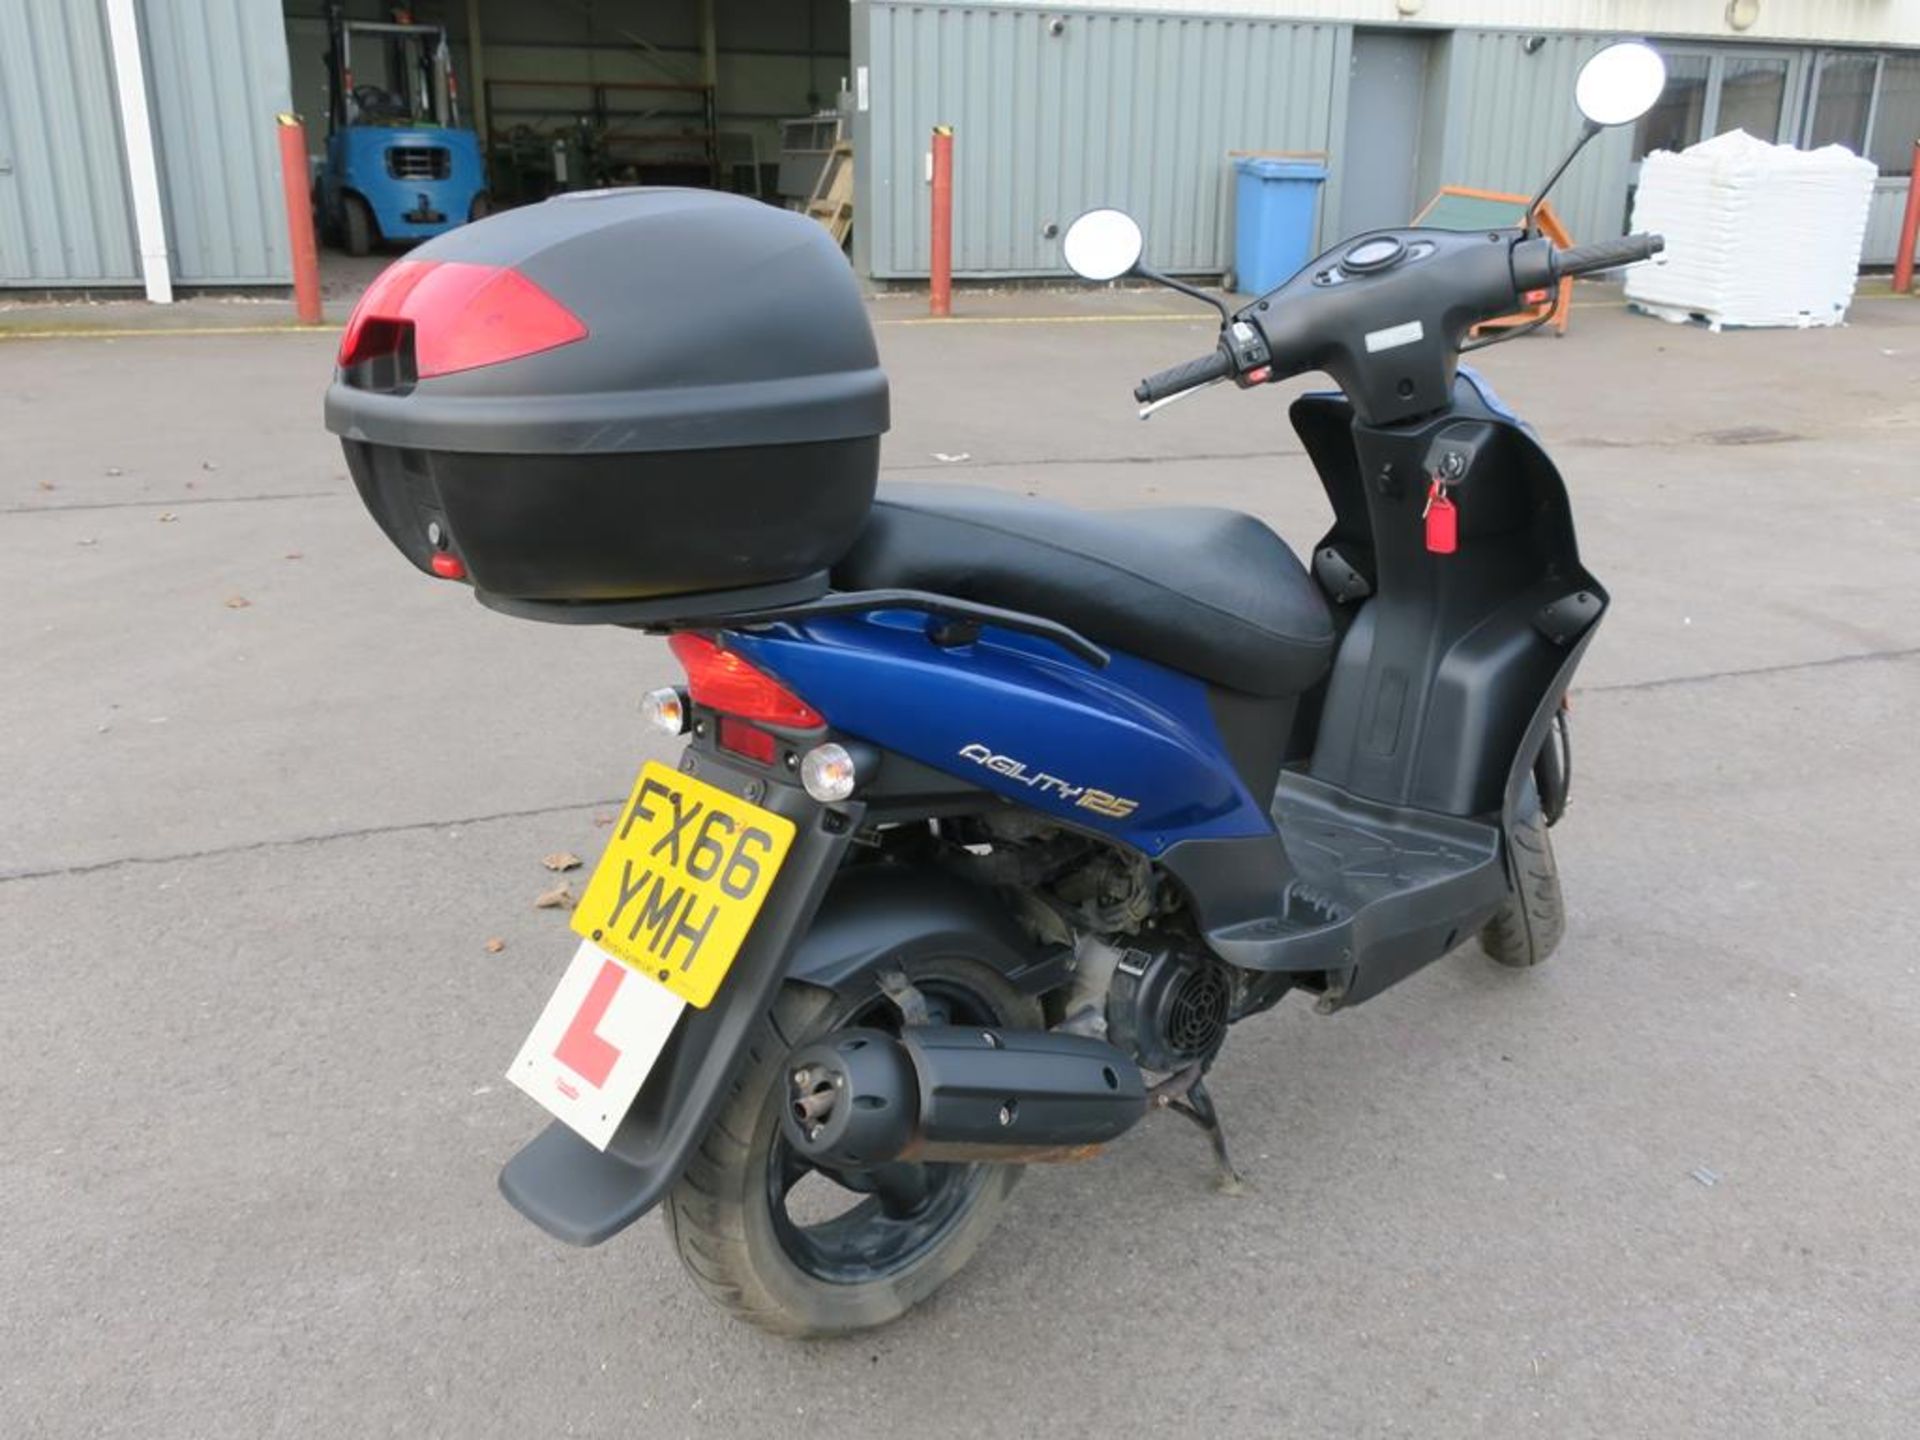 2016 Kymco Agility 125 Scooter Powered by a 125cc 4 Stroke Engine with automatic transmission, c/w - Image 2 of 6